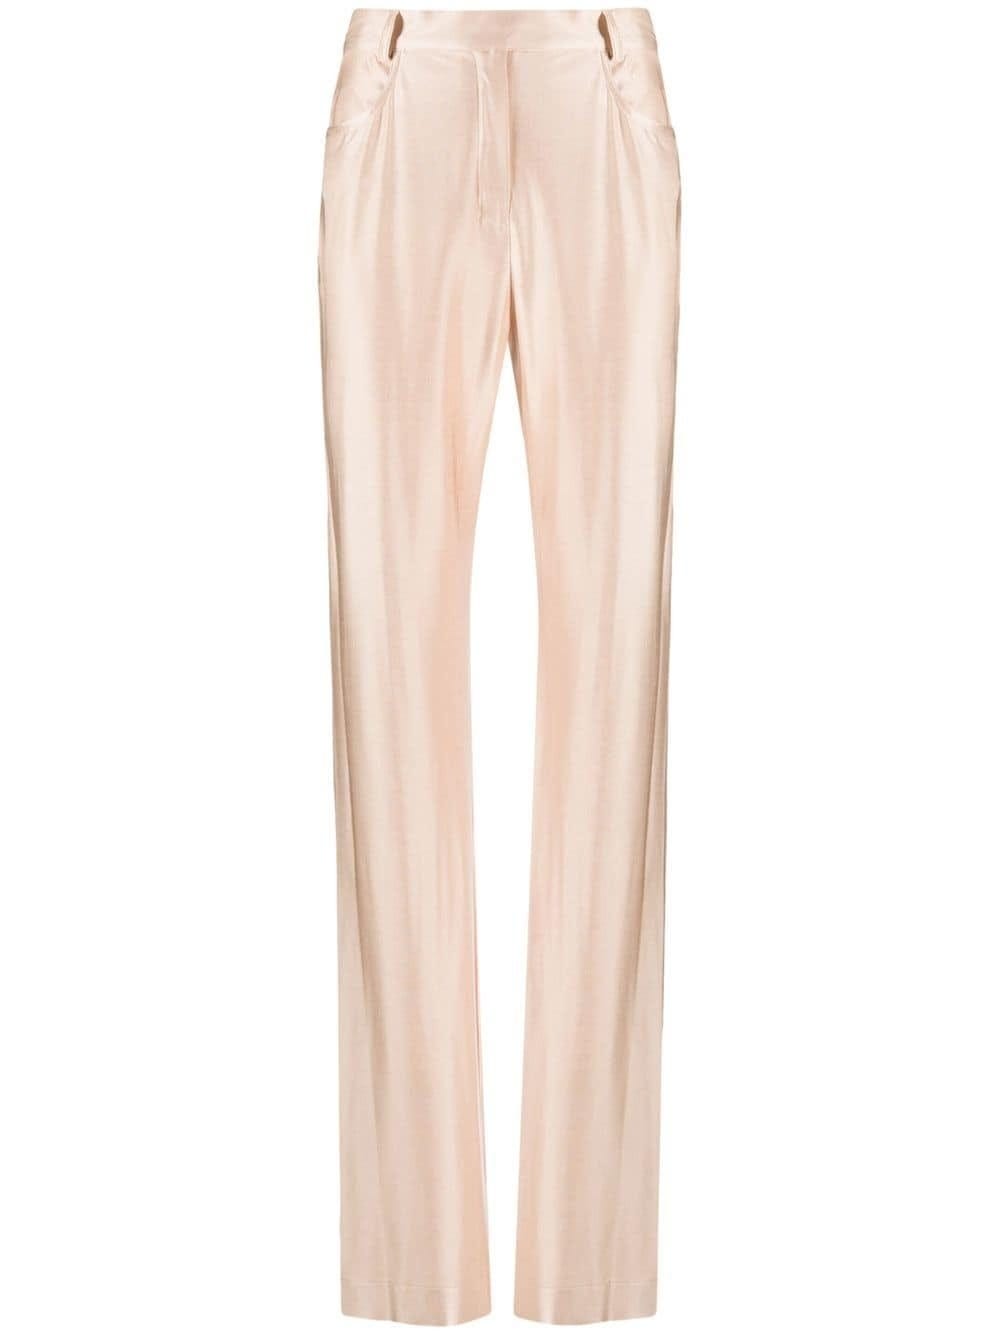 ALEXANDRE VAUTHIER PINK HIGH-WAISTED TROUSERS